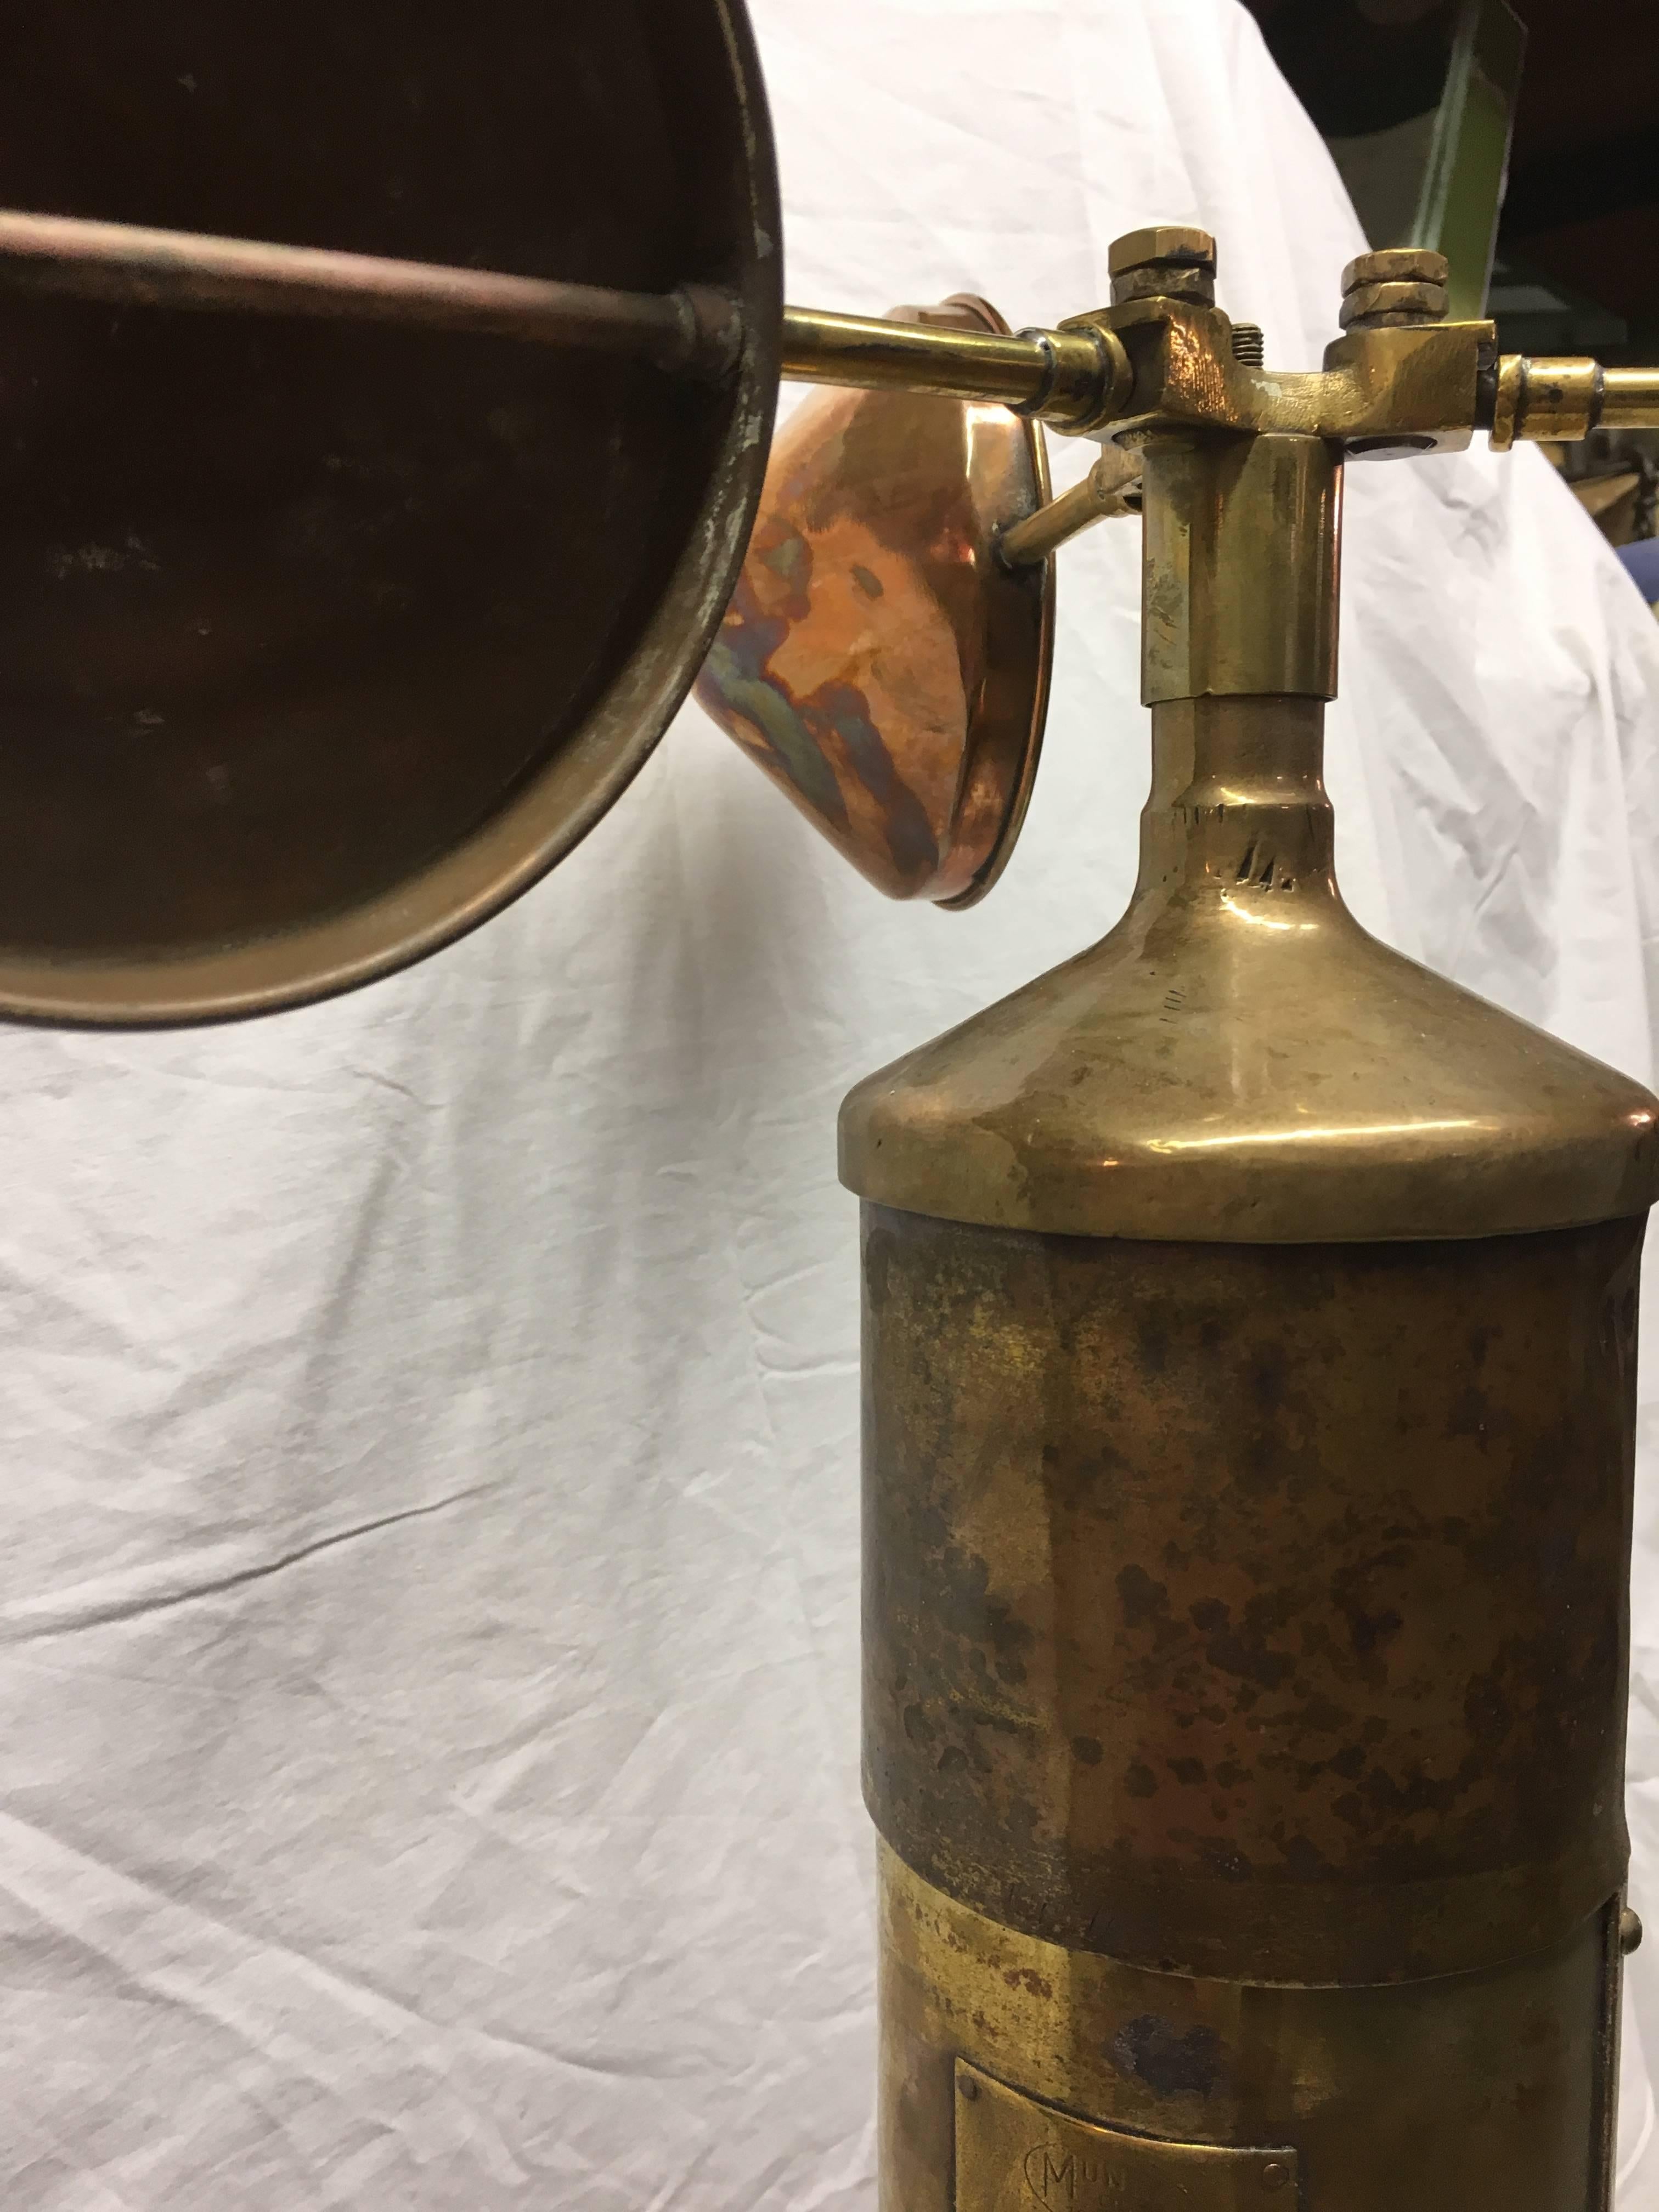 Aluminum Rare Copper and Brass Ship's Anemometer Signed by Munro from London, 1970s